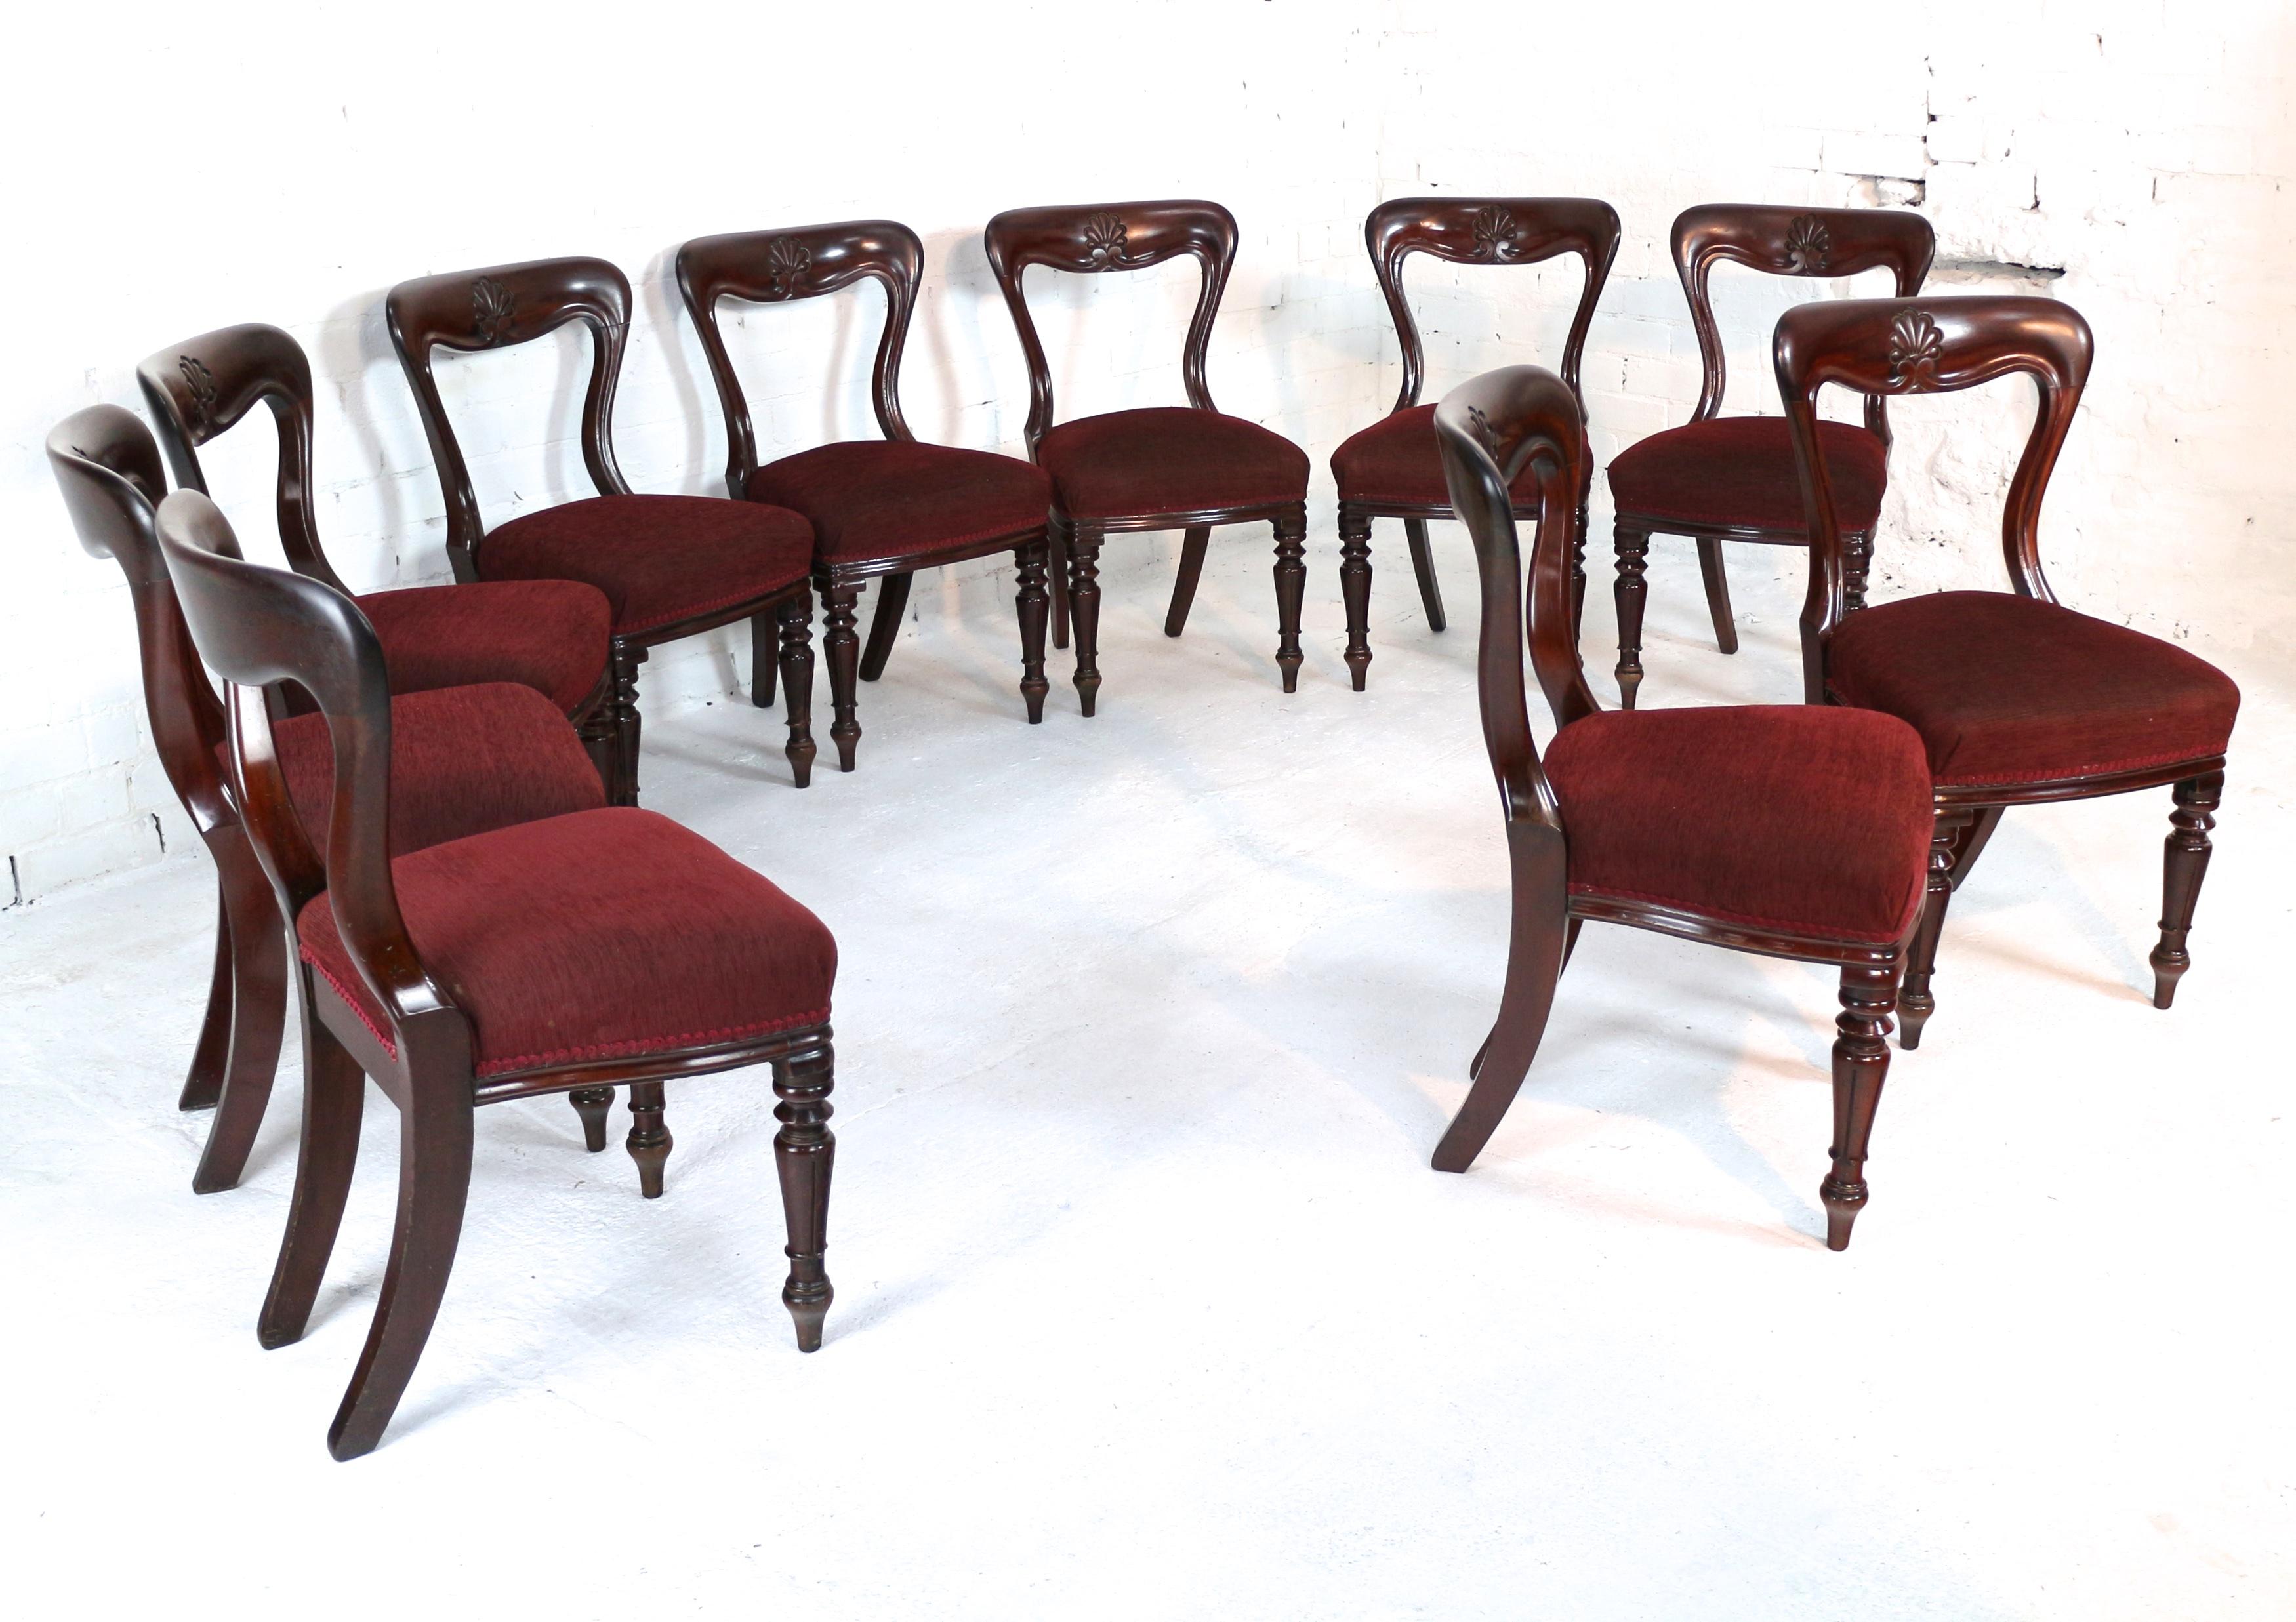 A fantastic set of ten William IV mahogany dining chairs dating to circa 1830 and by J Proctor. Made from the best quality dense and finely figured mahogany these are heavier than standard chairs of this model, the waisted balloon back with a deep